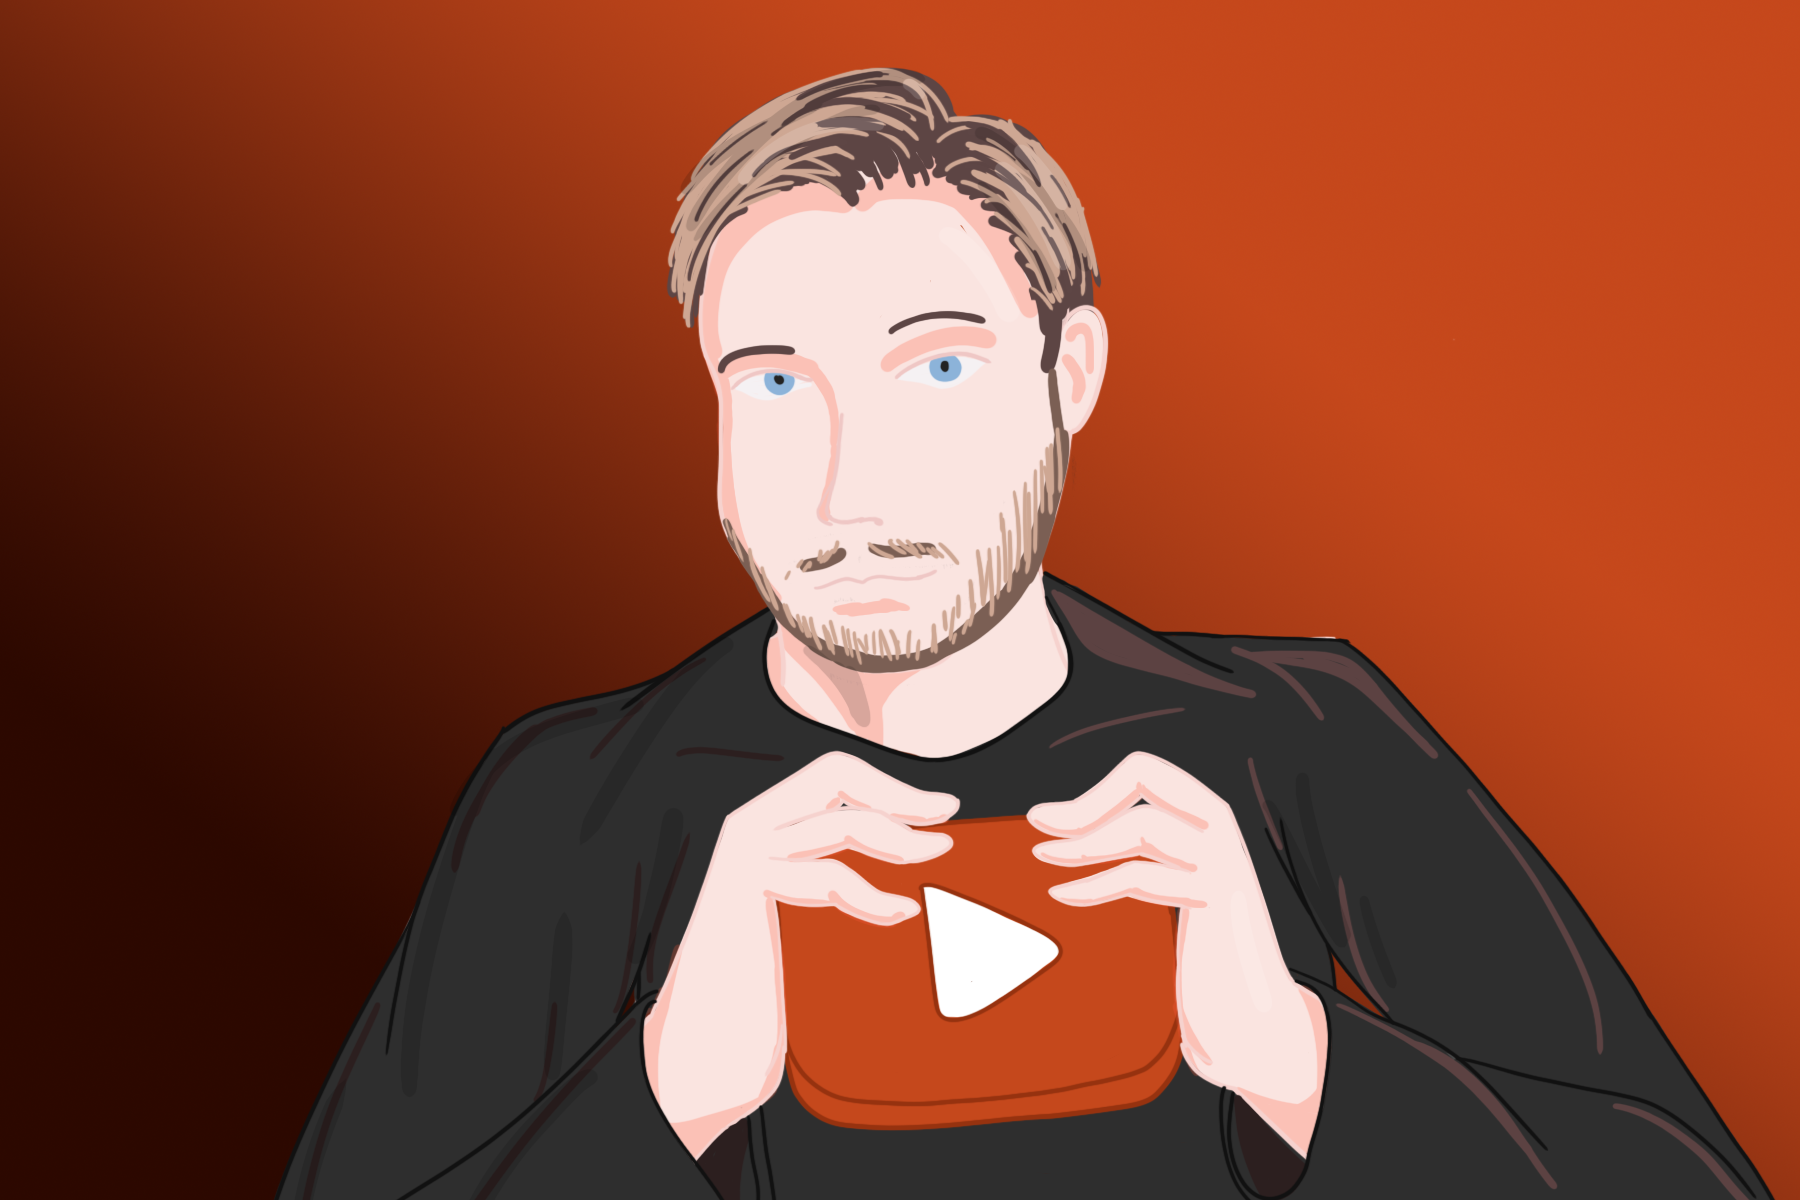 An illustration of PewDiePie in an article about YouTubers